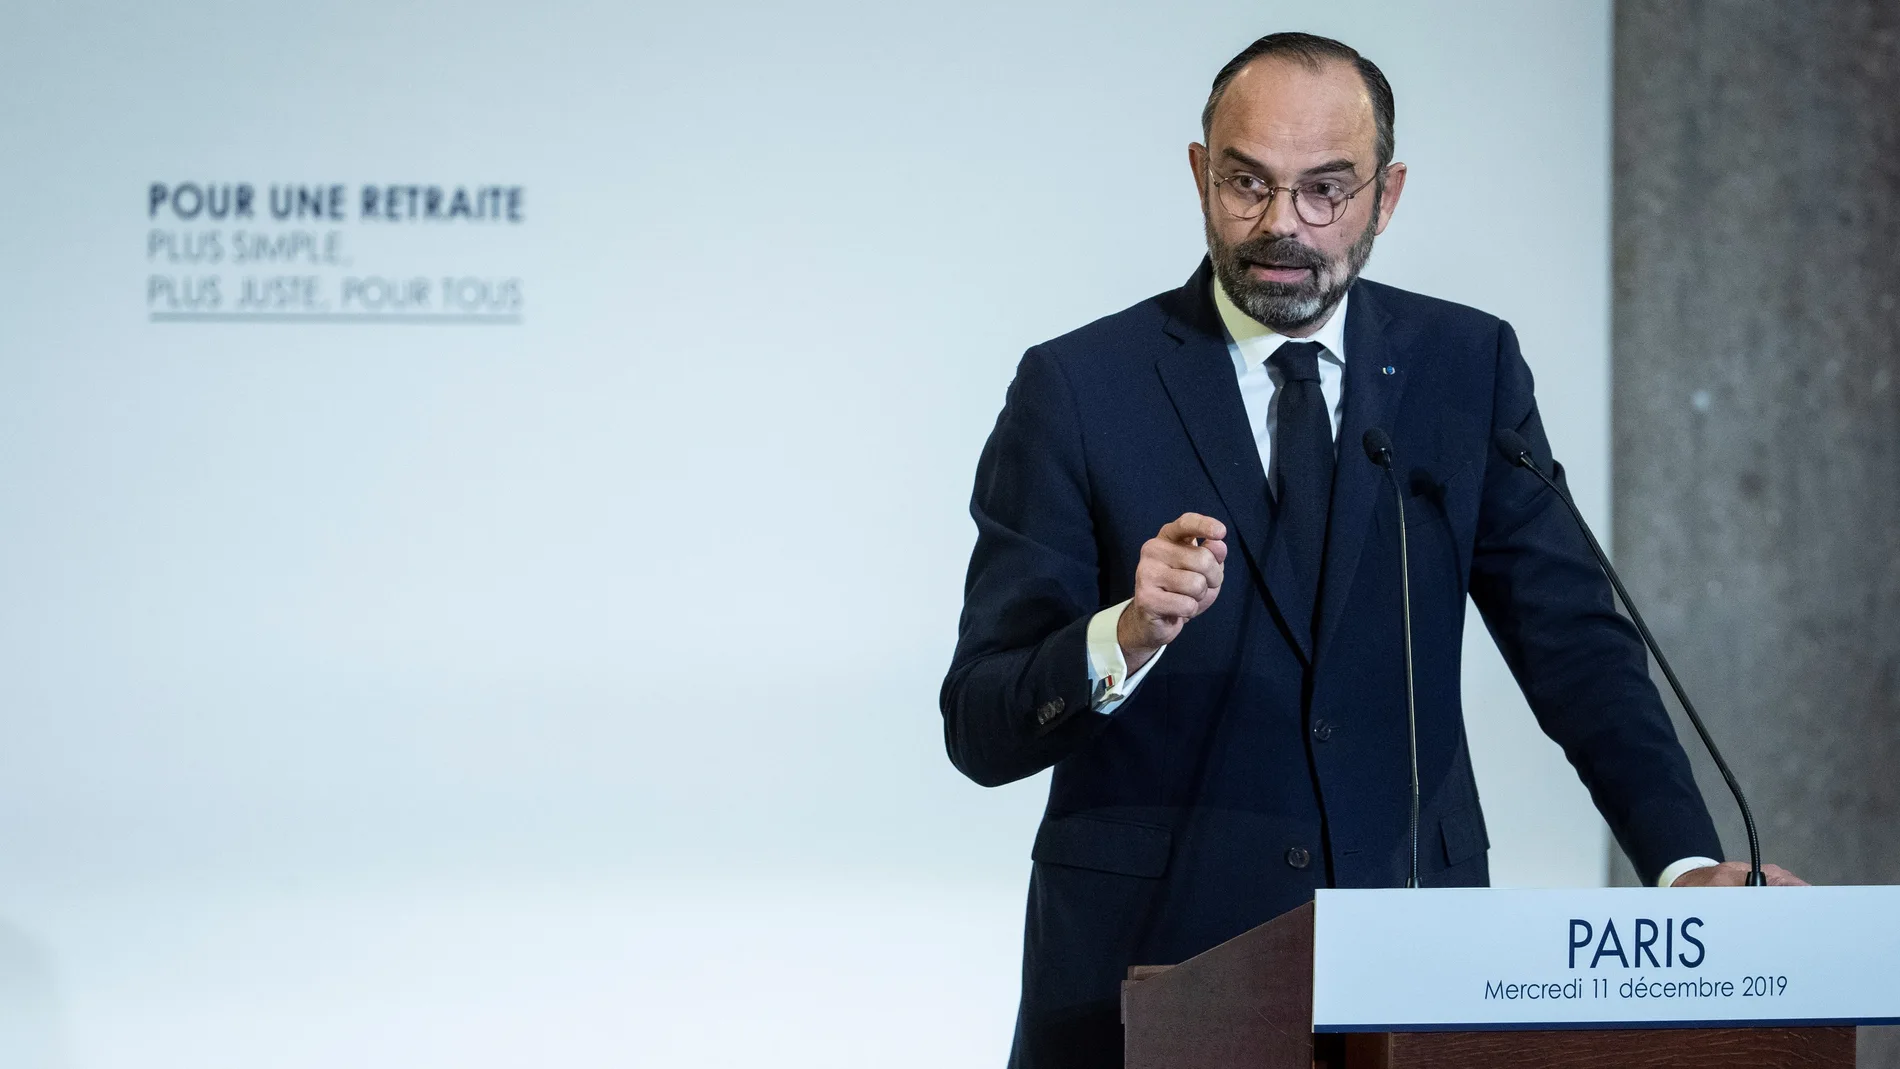 French government unveils details of a pension reform plan